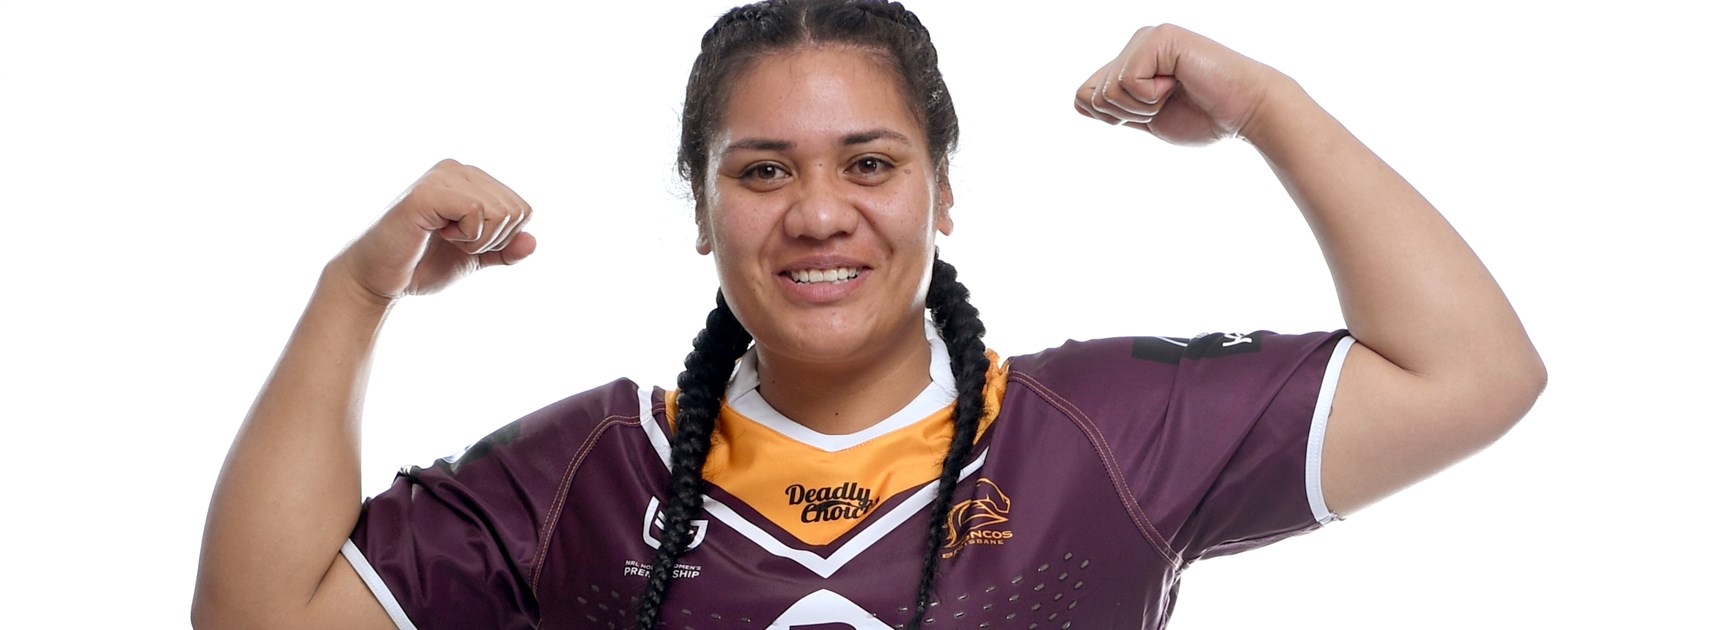 How Hall lost 20kg in 12 months to get back in NRLW frame